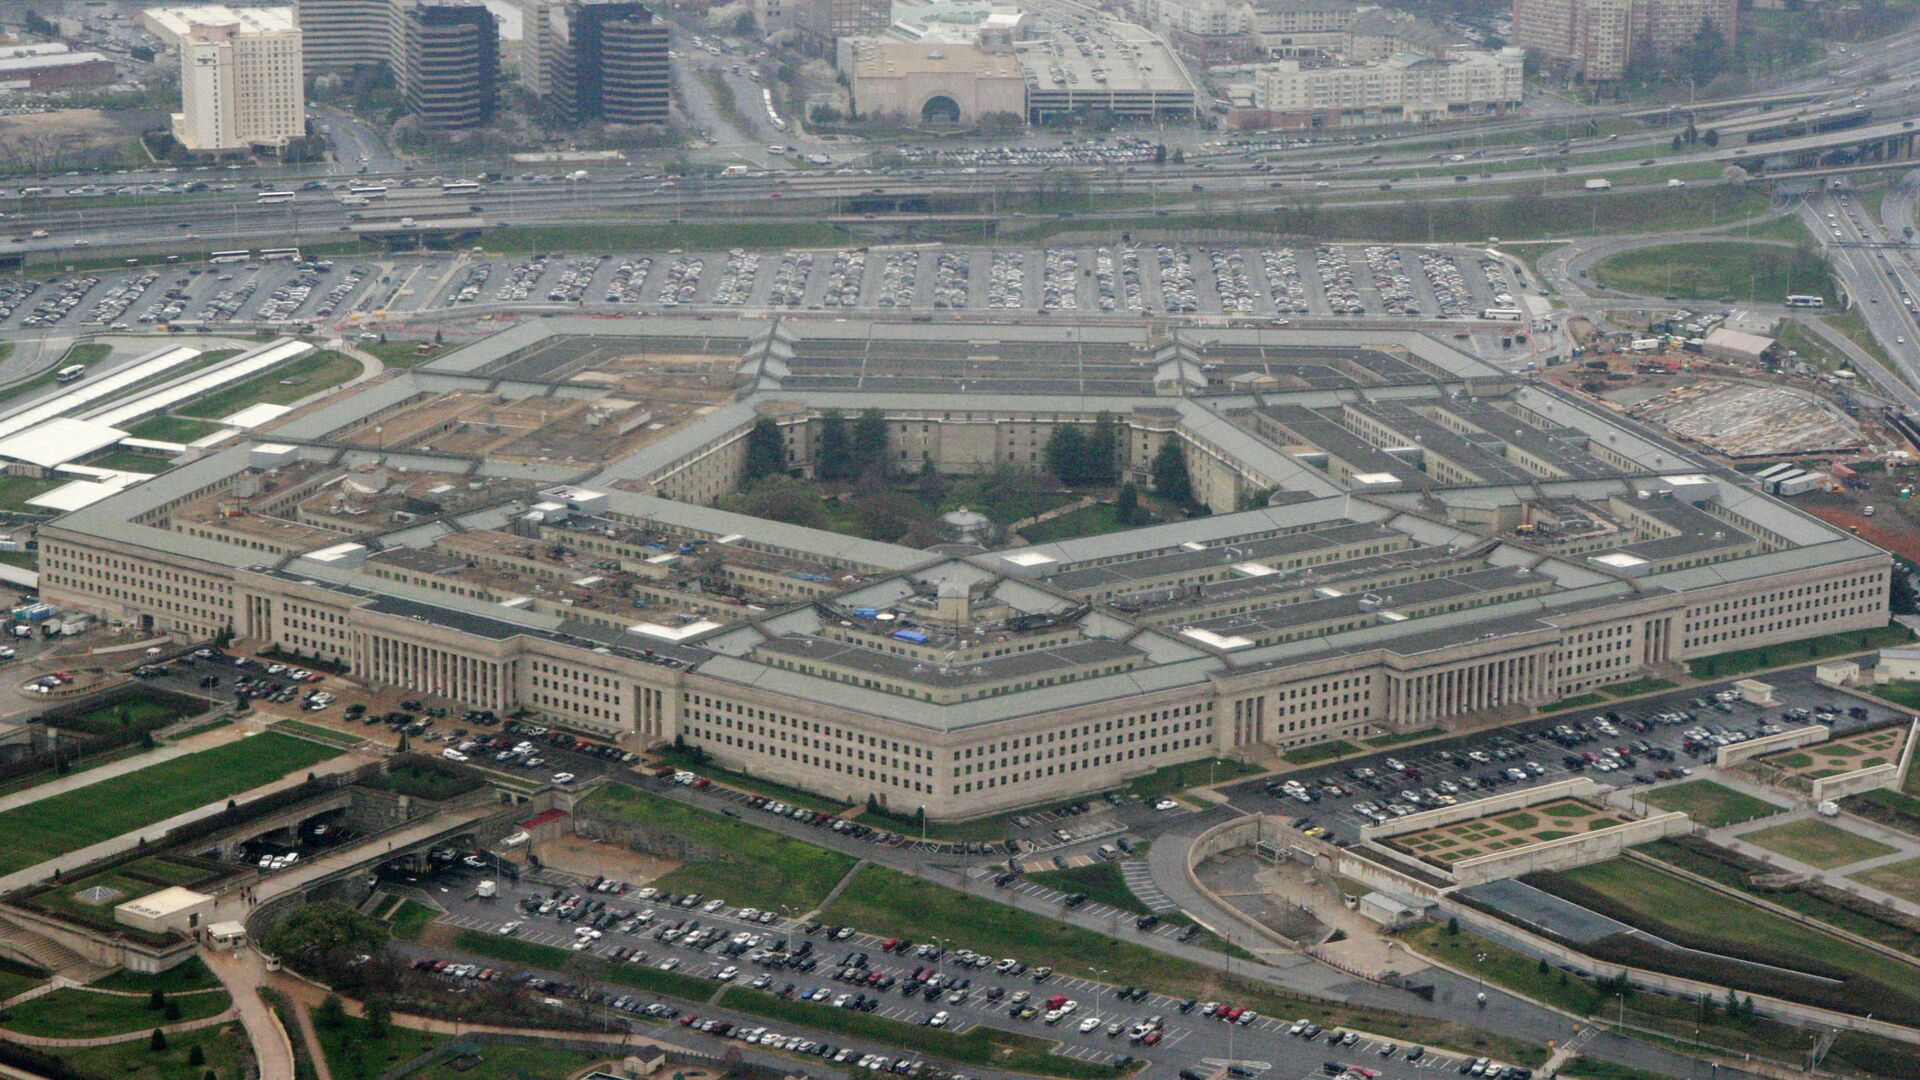 This March 27, 2008, file photo, shows the Pentagon in Washington. The Pentagon said Tuesday, July 6, 2021, that it is canceling a cloud-computing contract with Microsoft that could eventually have been worth $10 billion and will instead pursue a deal with both Microsoft and Amazon. (AP Photo/Charles Dharapak, File) - Sputnik International, 1920, 29.07.2021